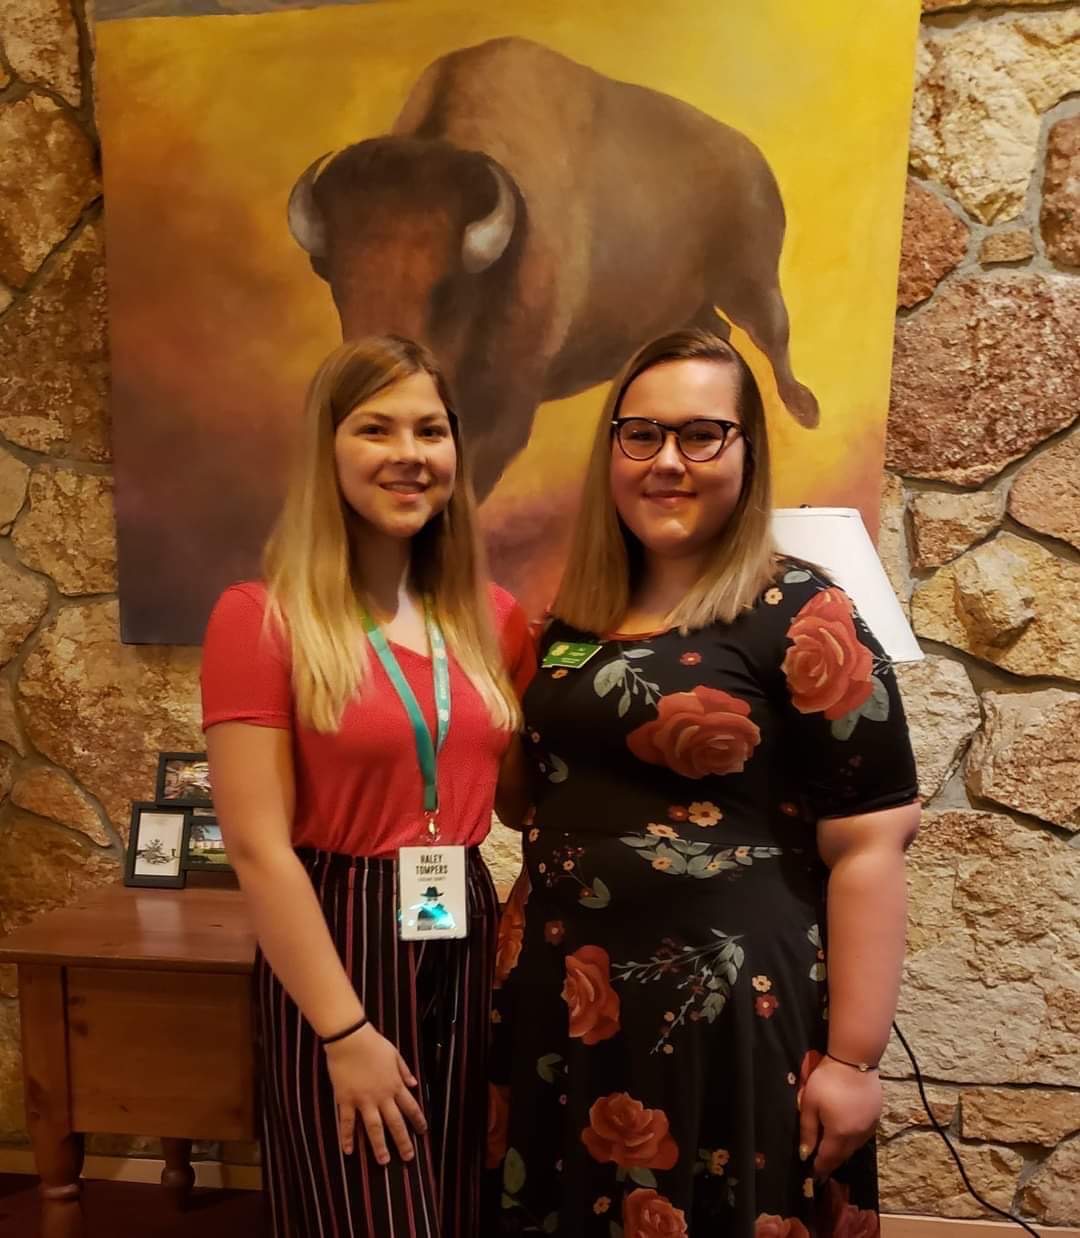 Two young ladies in dresses standing in front of a painting of a buffalo hanging on a rock slate wall.